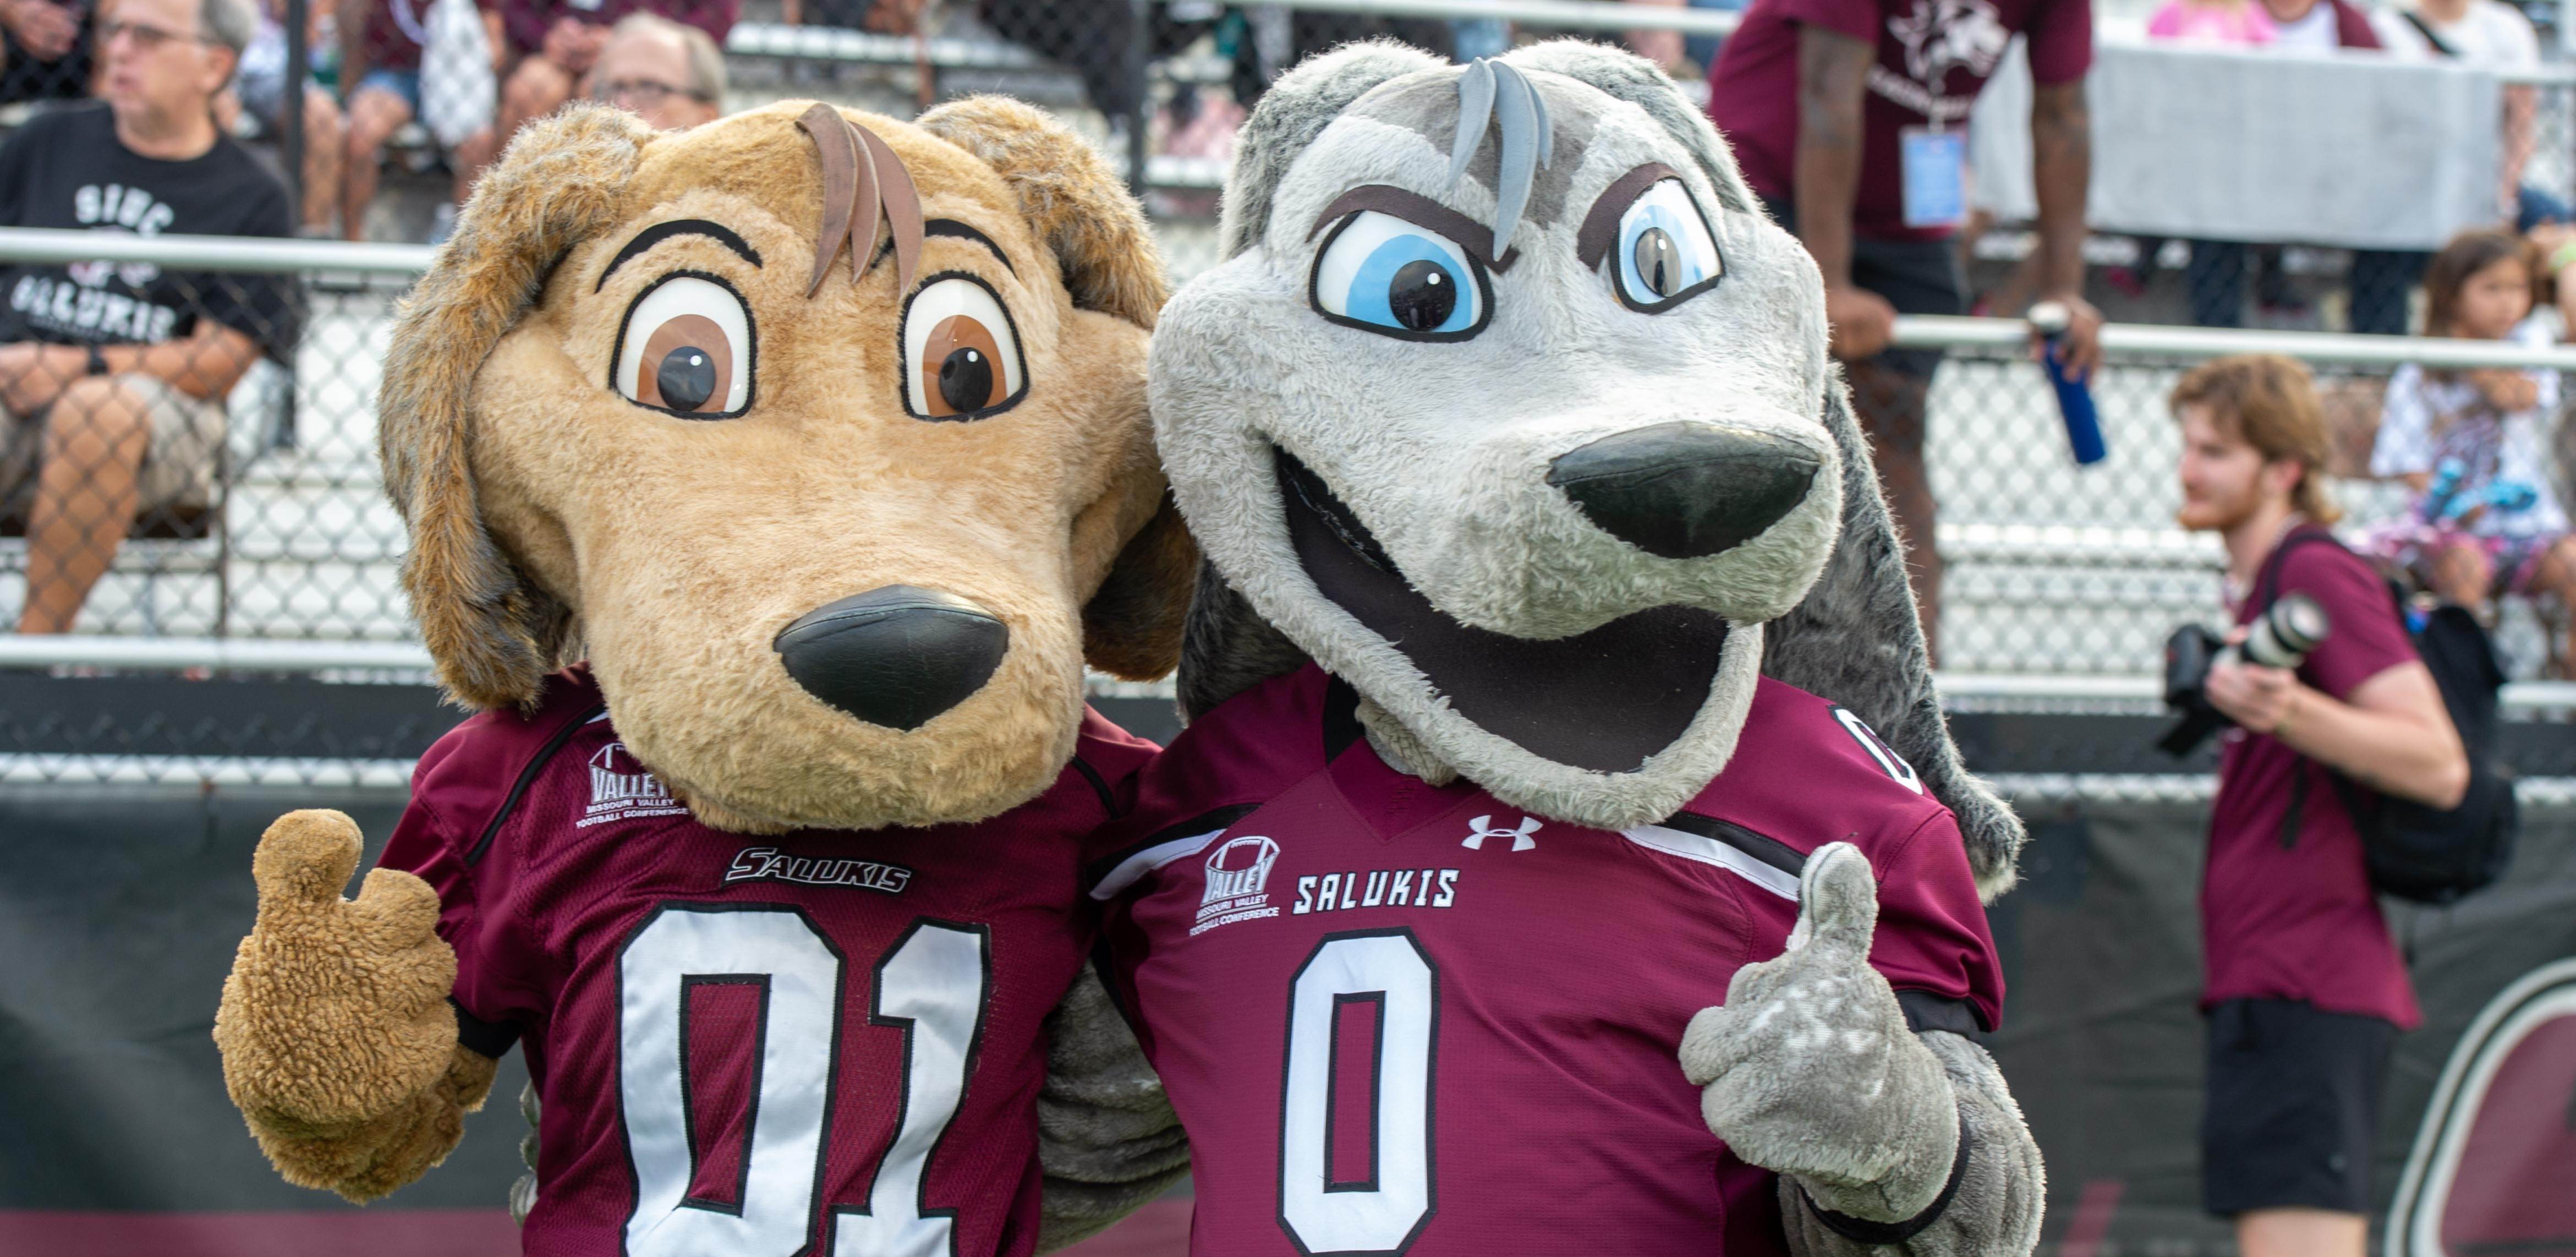 mascots with thumbs up